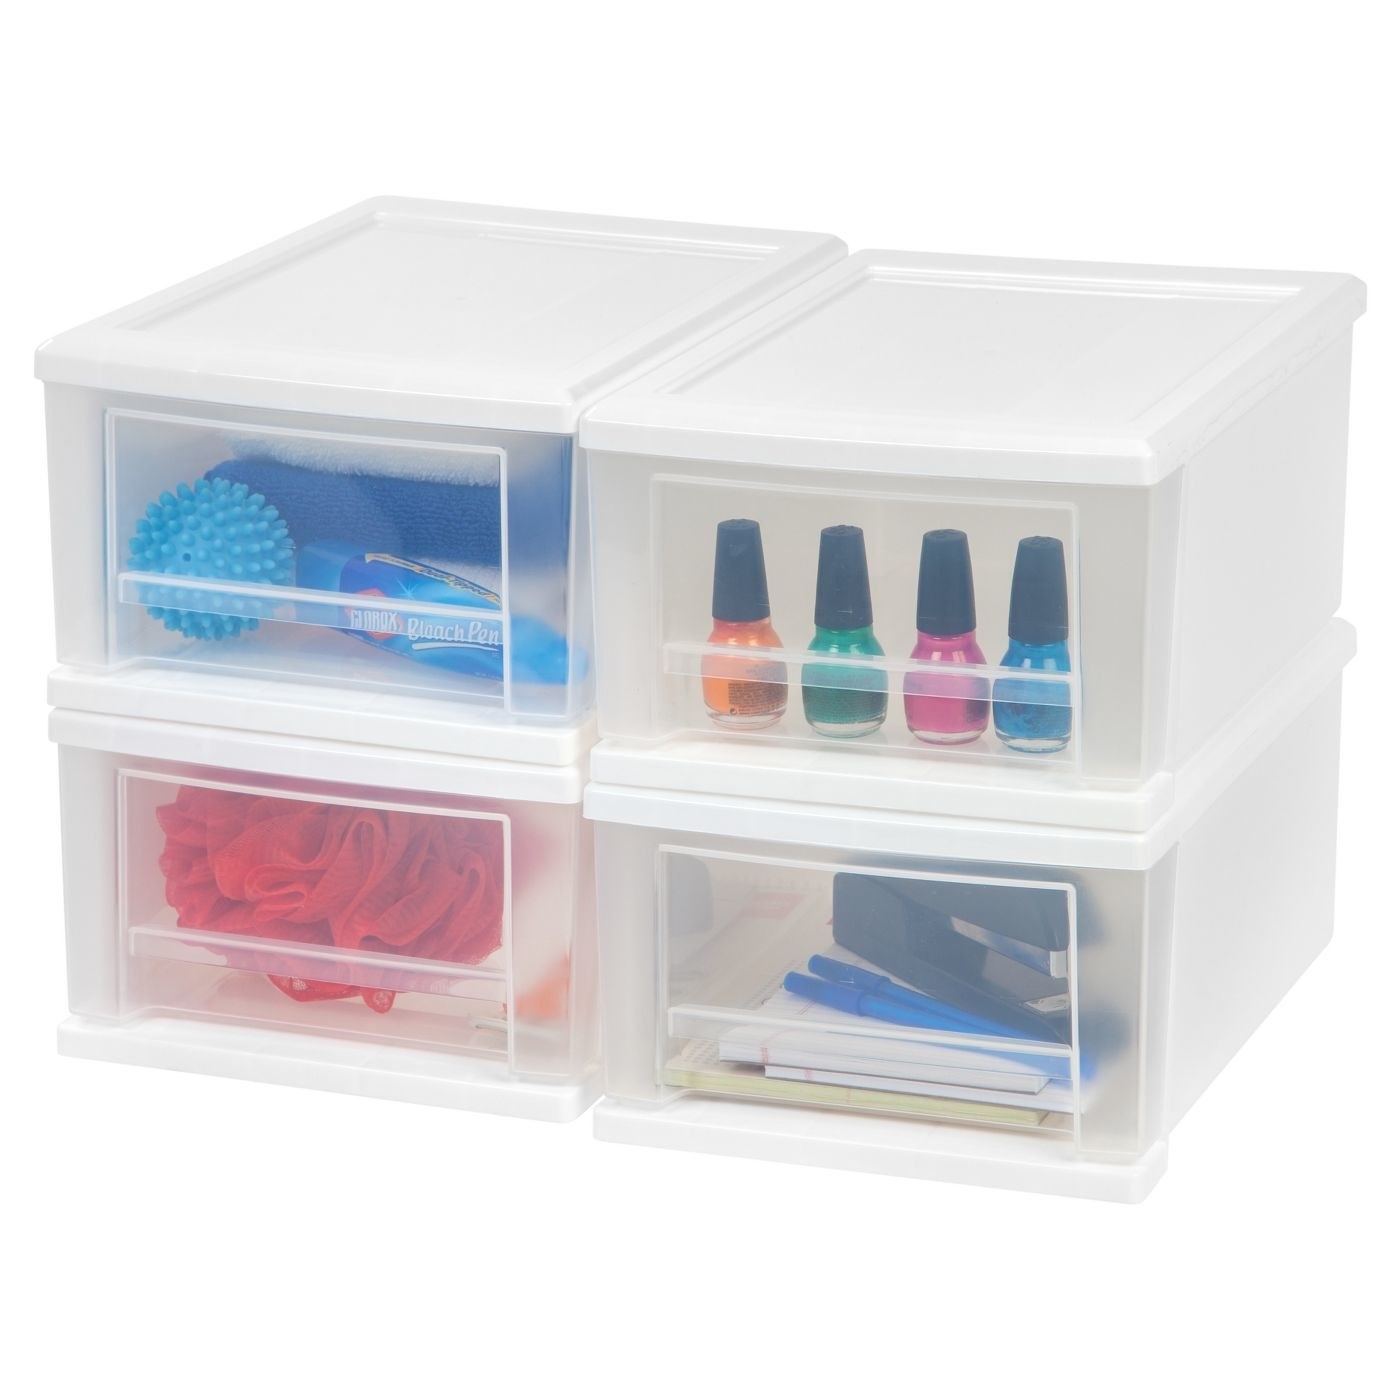 Four of the drawers stacked in a square, holding things like nail polish, office supplies, cleaning products, and toiletries